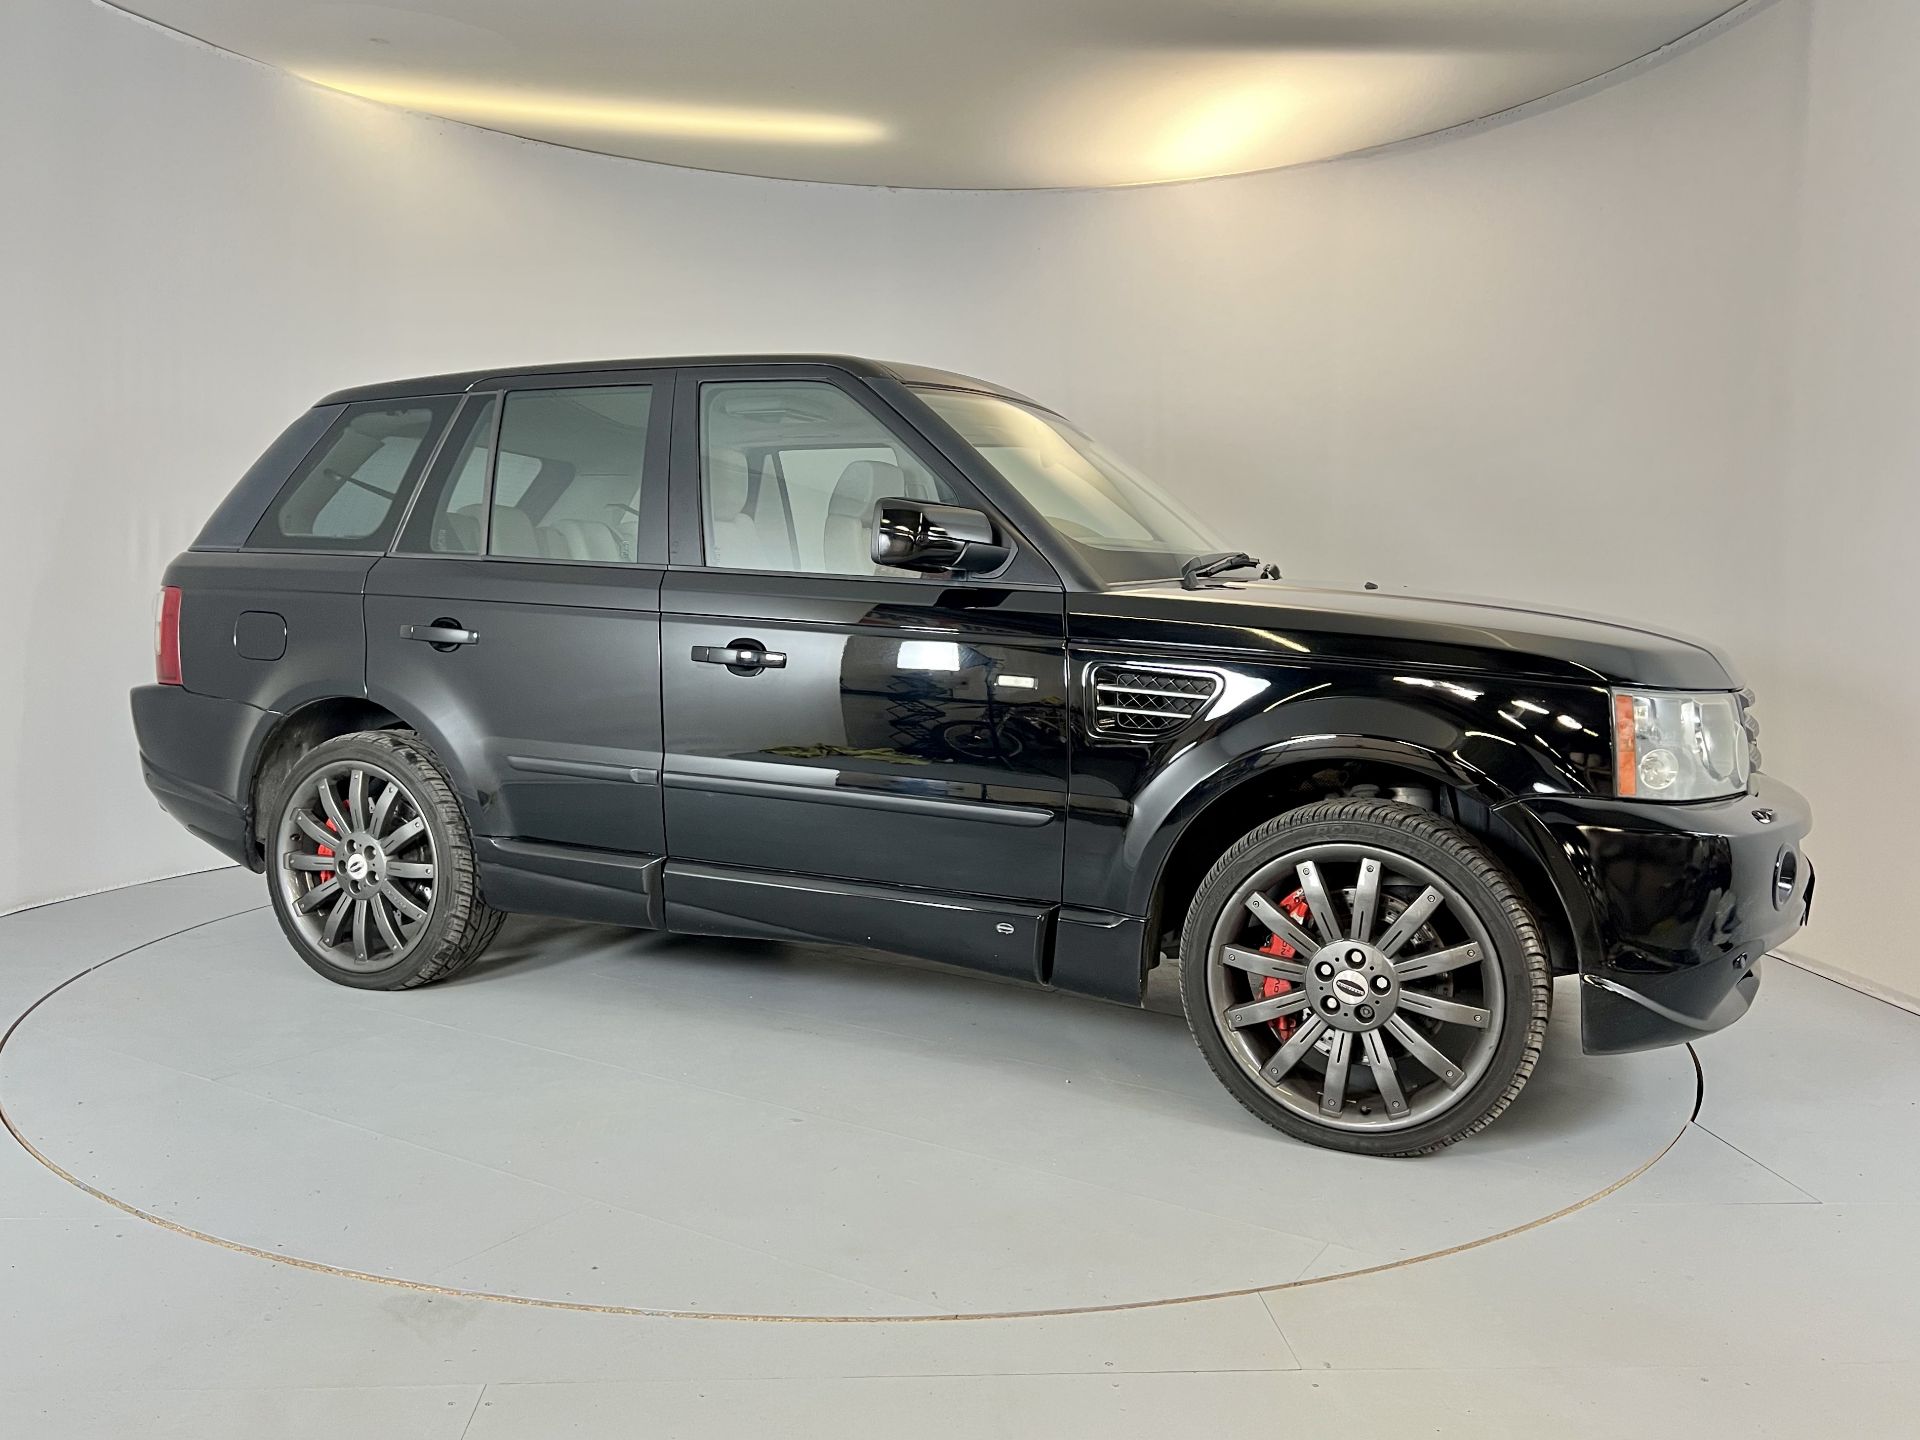 Range Rover Sport 1st Edition 4.2 Supercharged OverFinch - Image 12 of 33